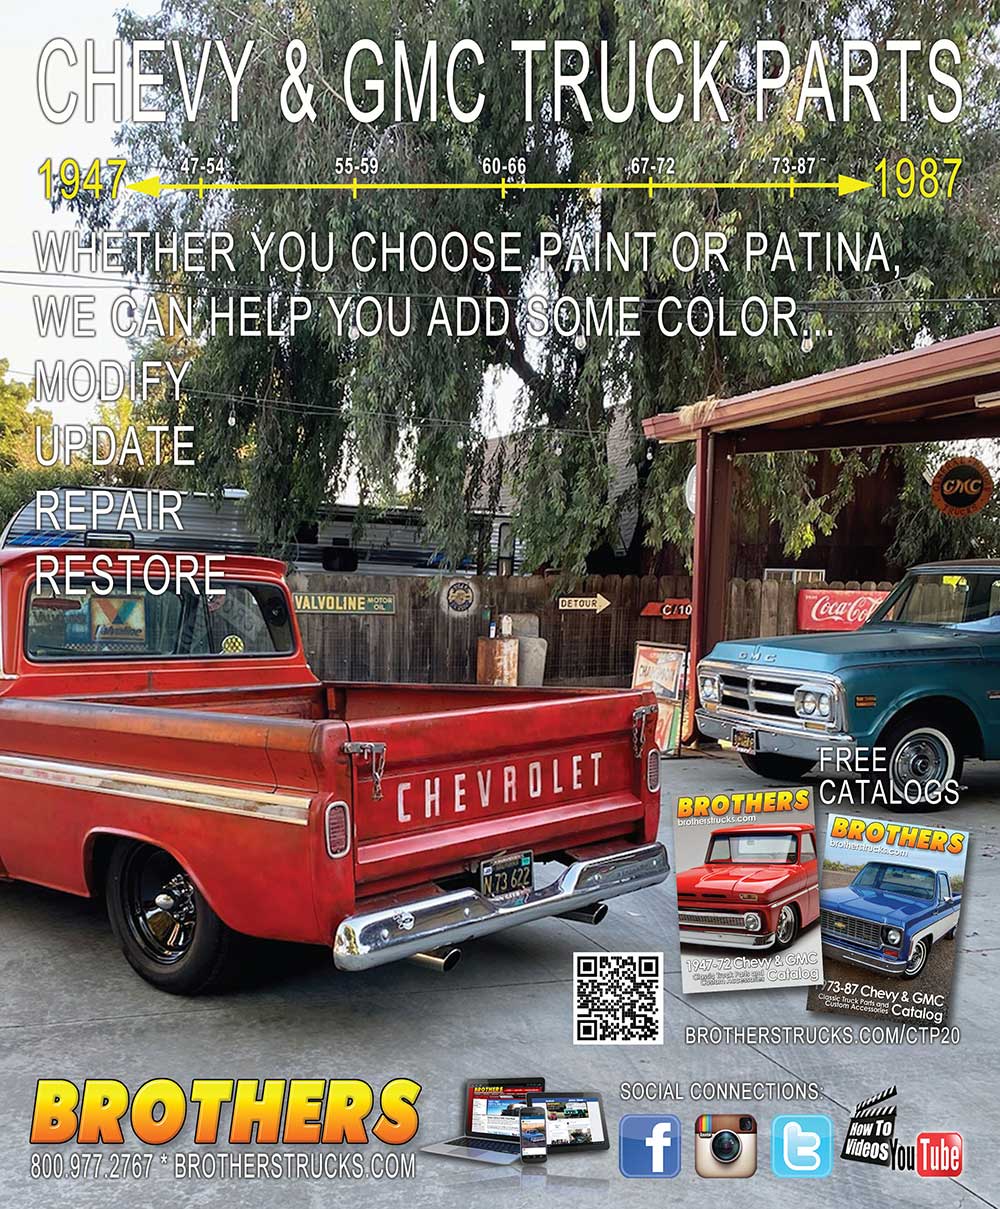 Brothers Truck Parts Advertisement